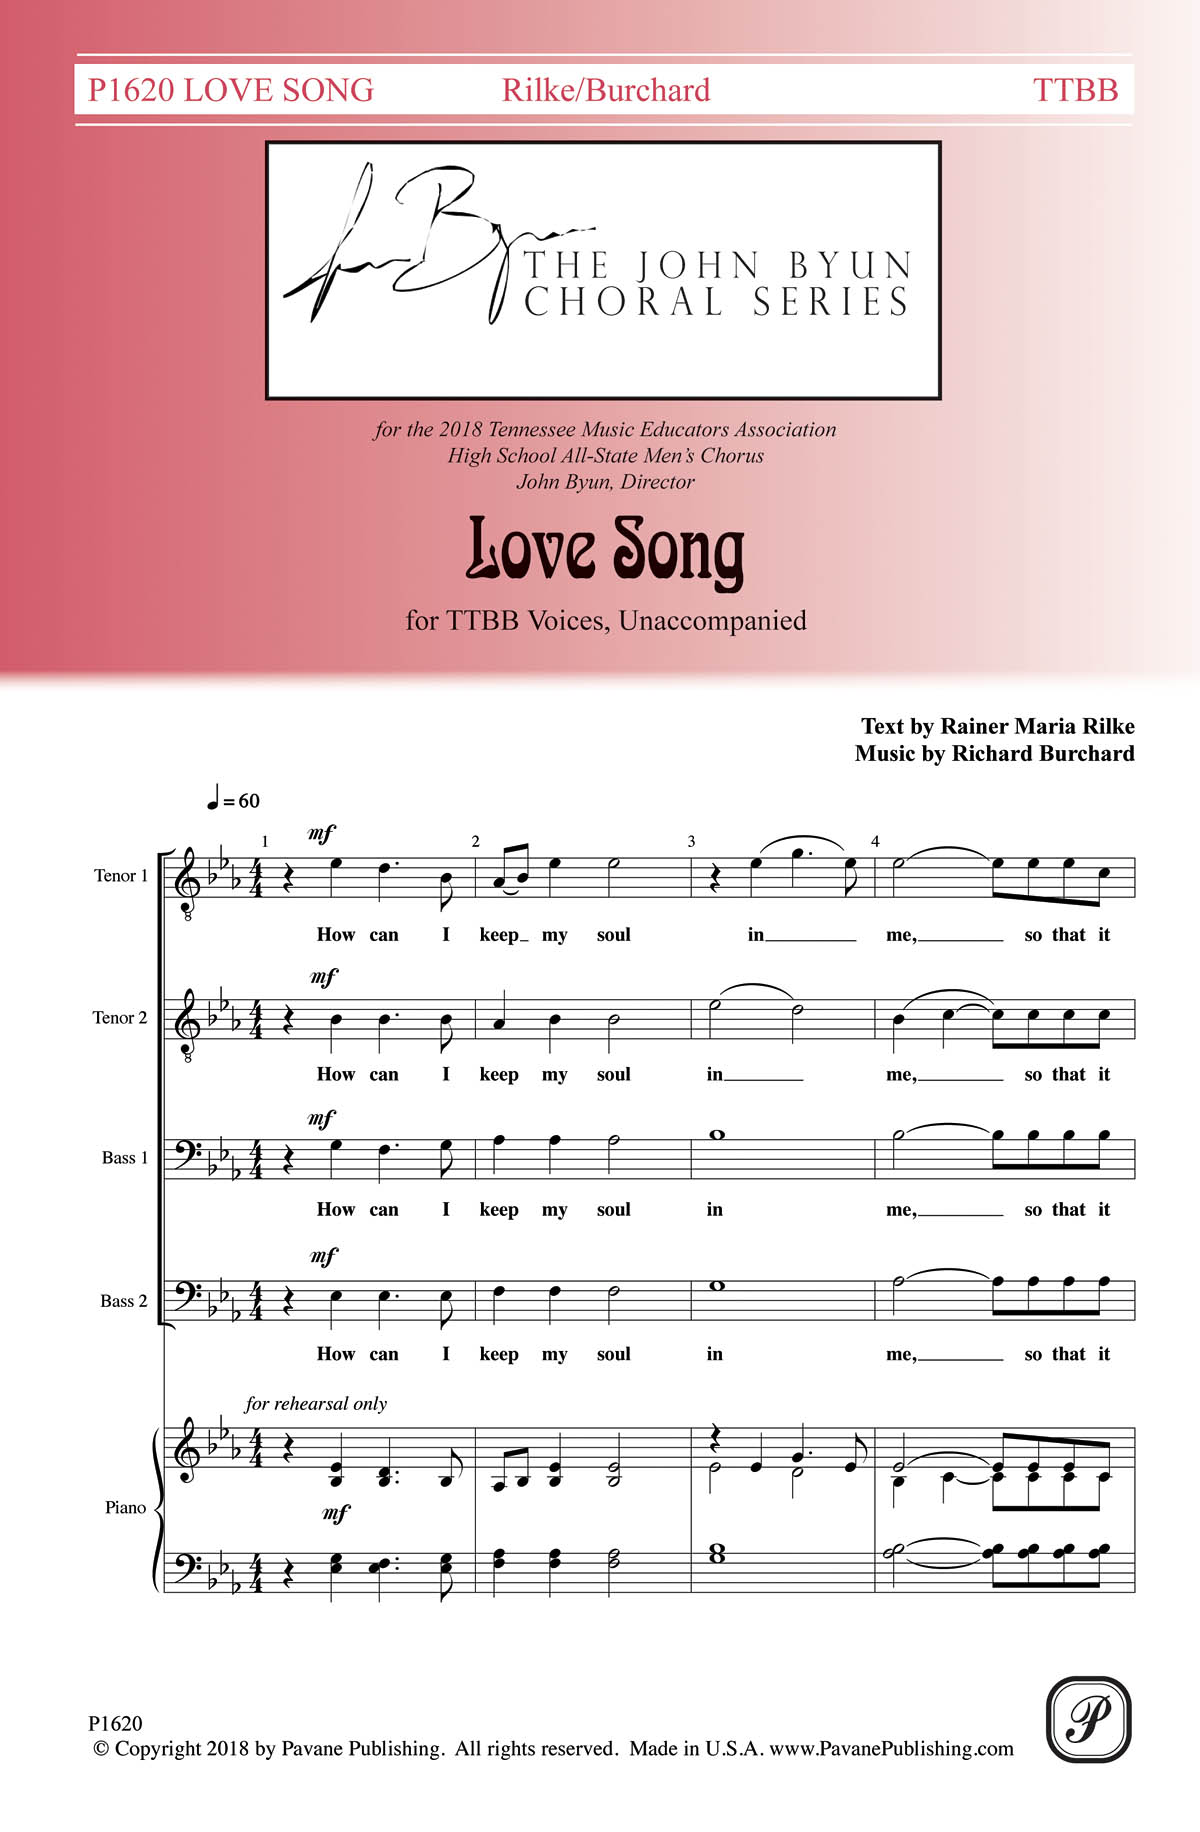 Richard Burchard: Love Song: Lower Voices a Cappella: Vocal Score